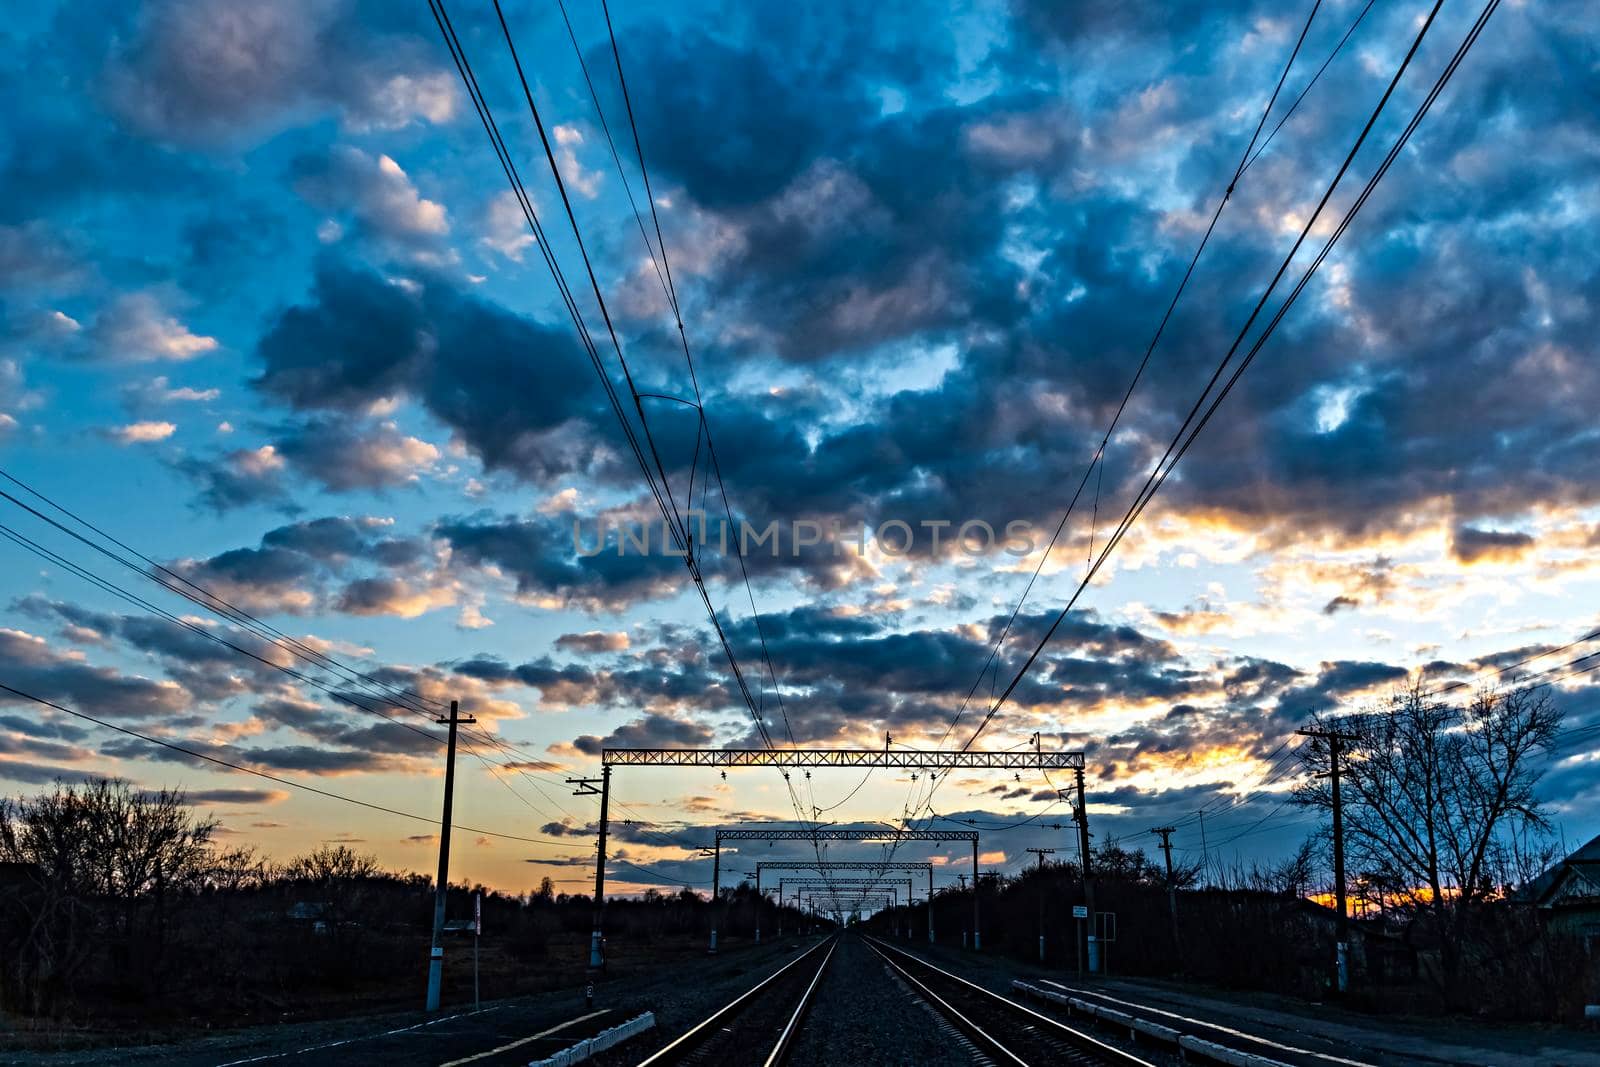 A railway with railway tracks, poles and wires at the dawn of the sun.The heavenly light of the sun.Dramatic evening sky with clouds and rays of the sun.Sunlight at evening sunset or morning dawn.View